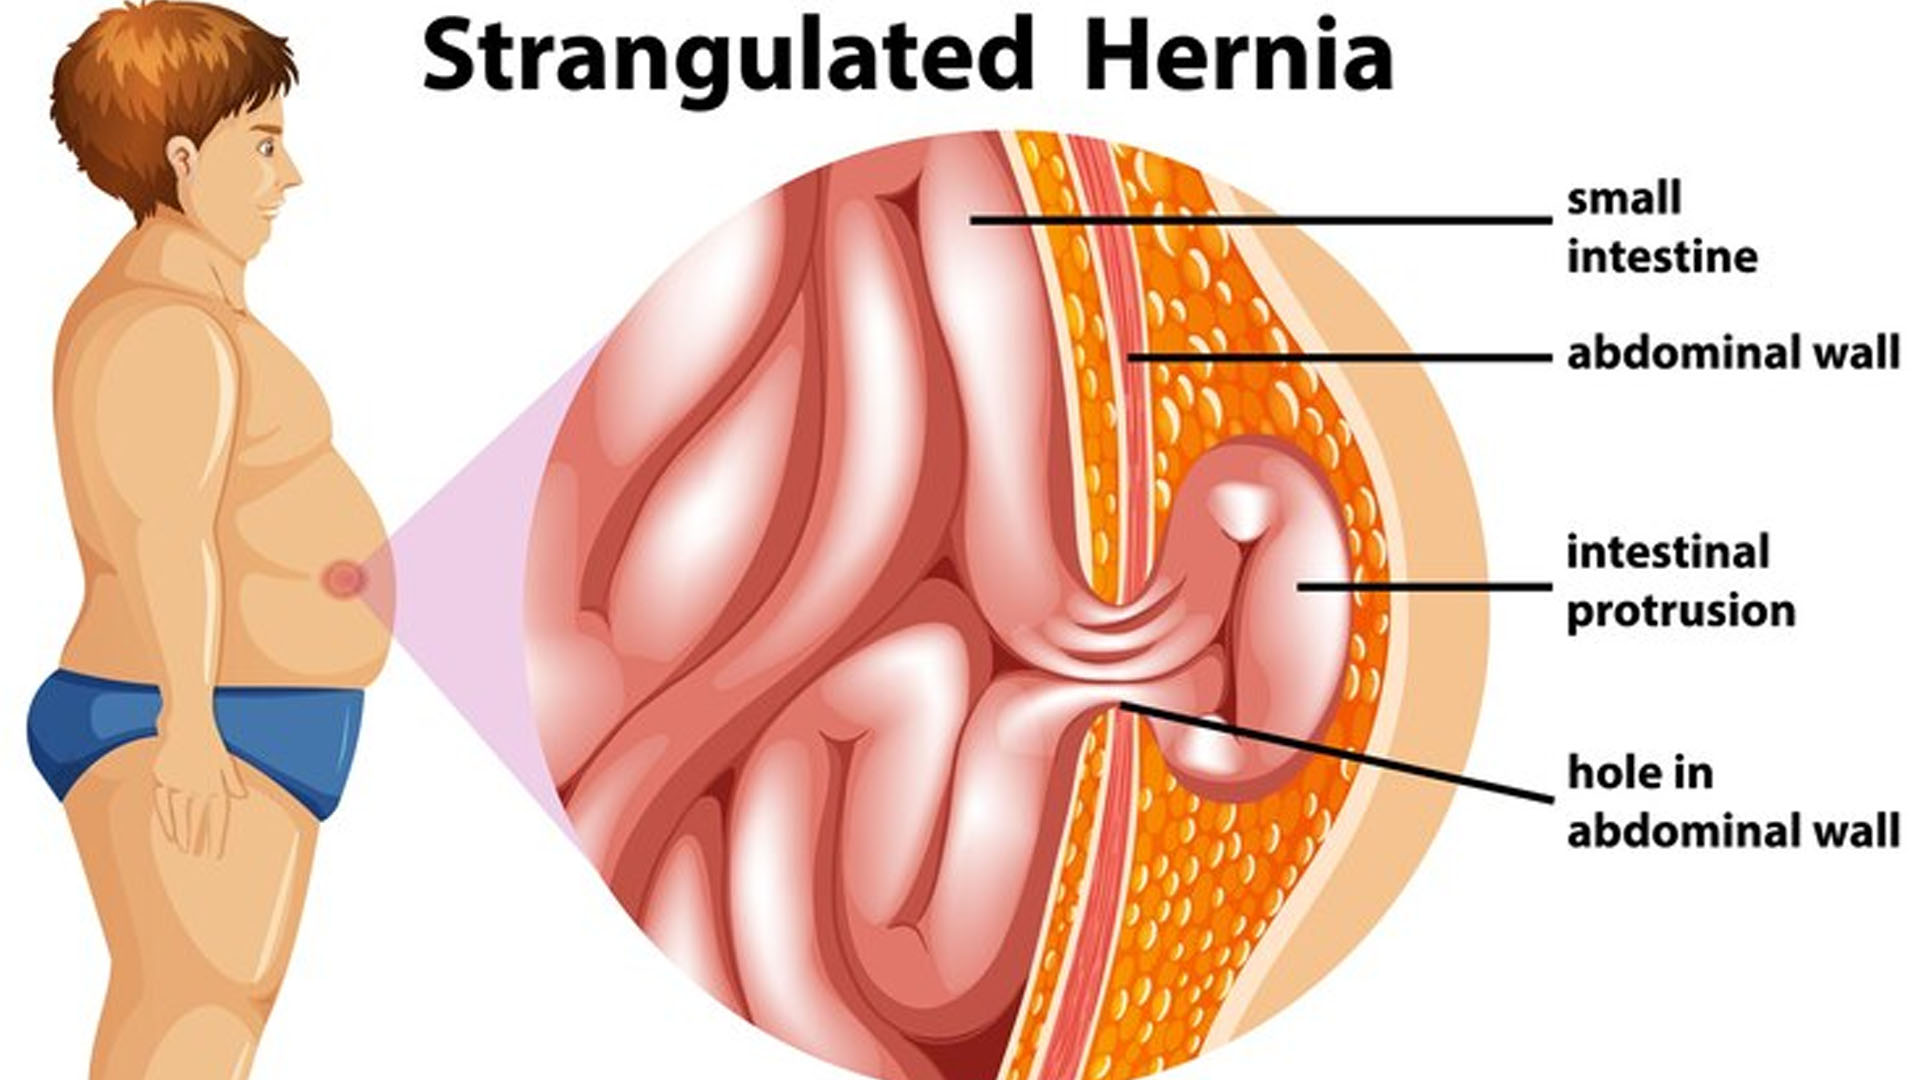 What are the Home Remedies for Hernia?